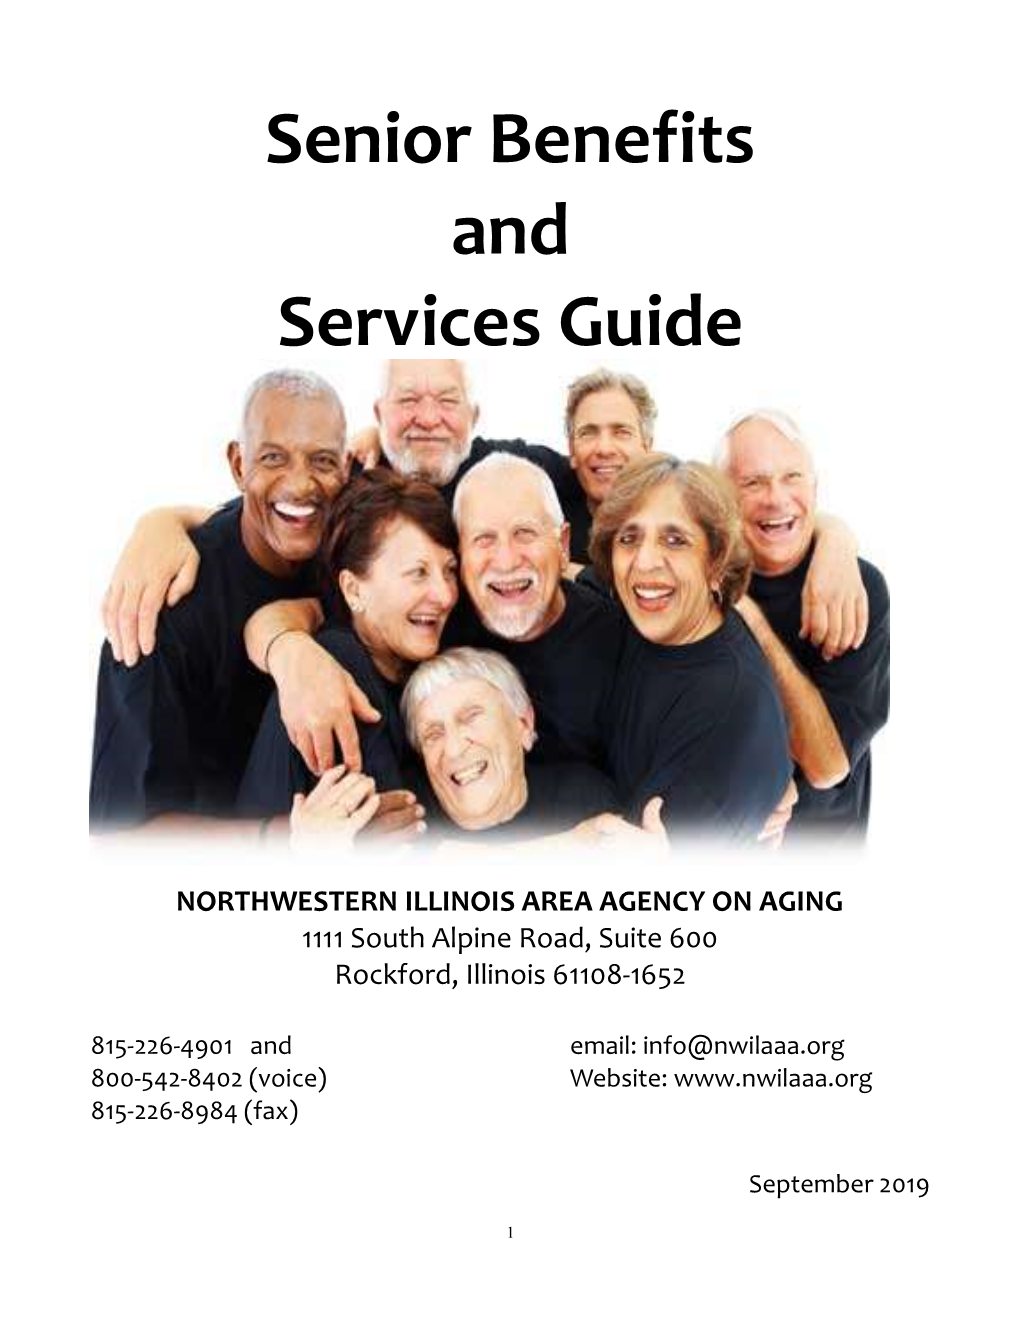 Senior Benefits and Services Guide